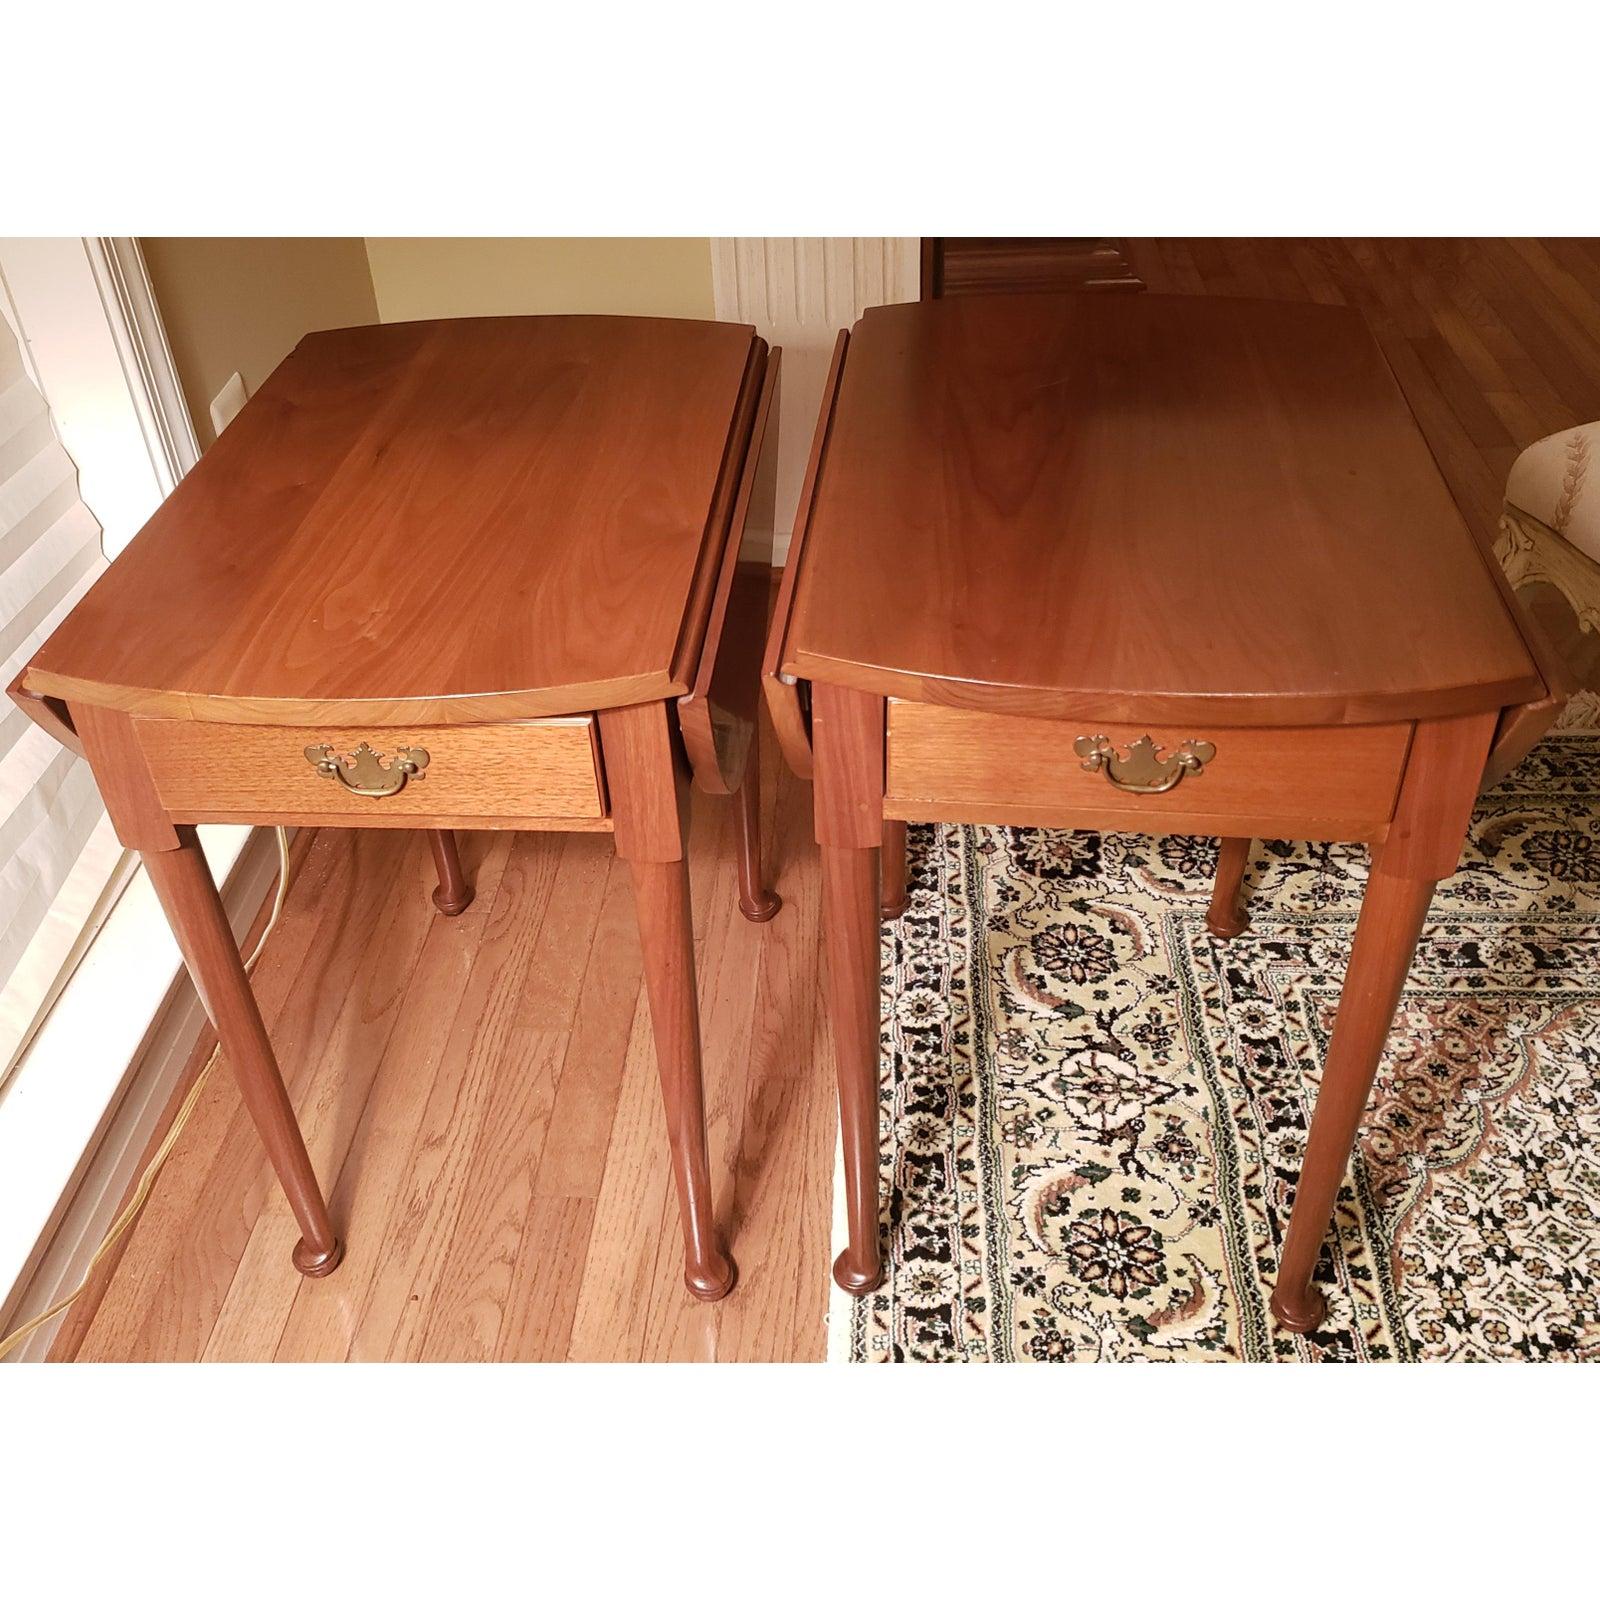 Suters Pembroke drop-leaves oval cherry side tables. These oval drop-leaves and single drawer make this table a versatile and elegant accent for any room. Measurements:
Measures: 16